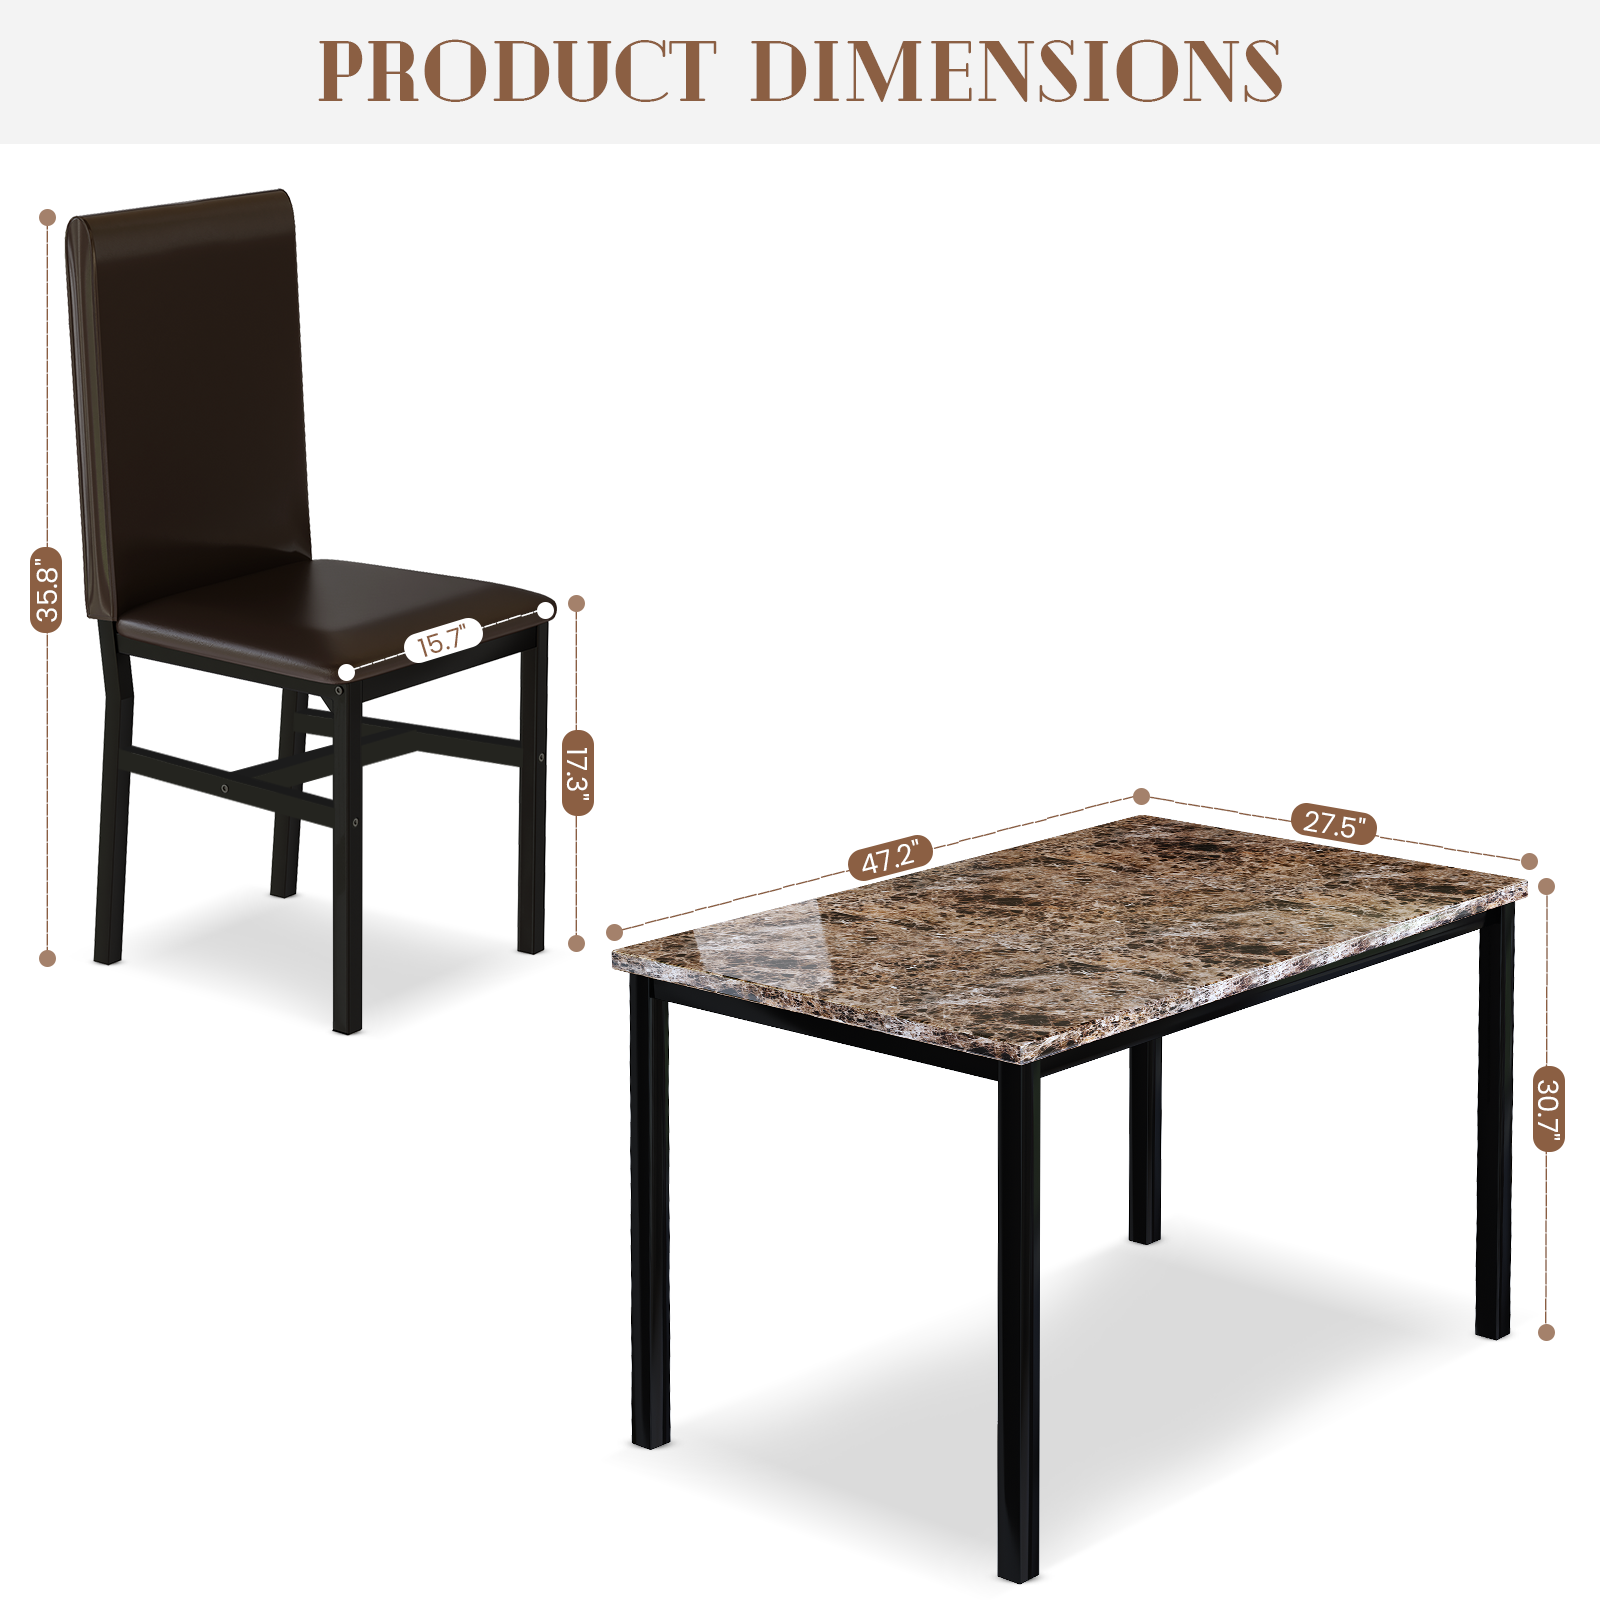 AWQM 5 Piece Dining Table Set for 4,Faux Marble Kitchen Table and Chairs for 4, Dining Room Table Set with Chairs, Brown